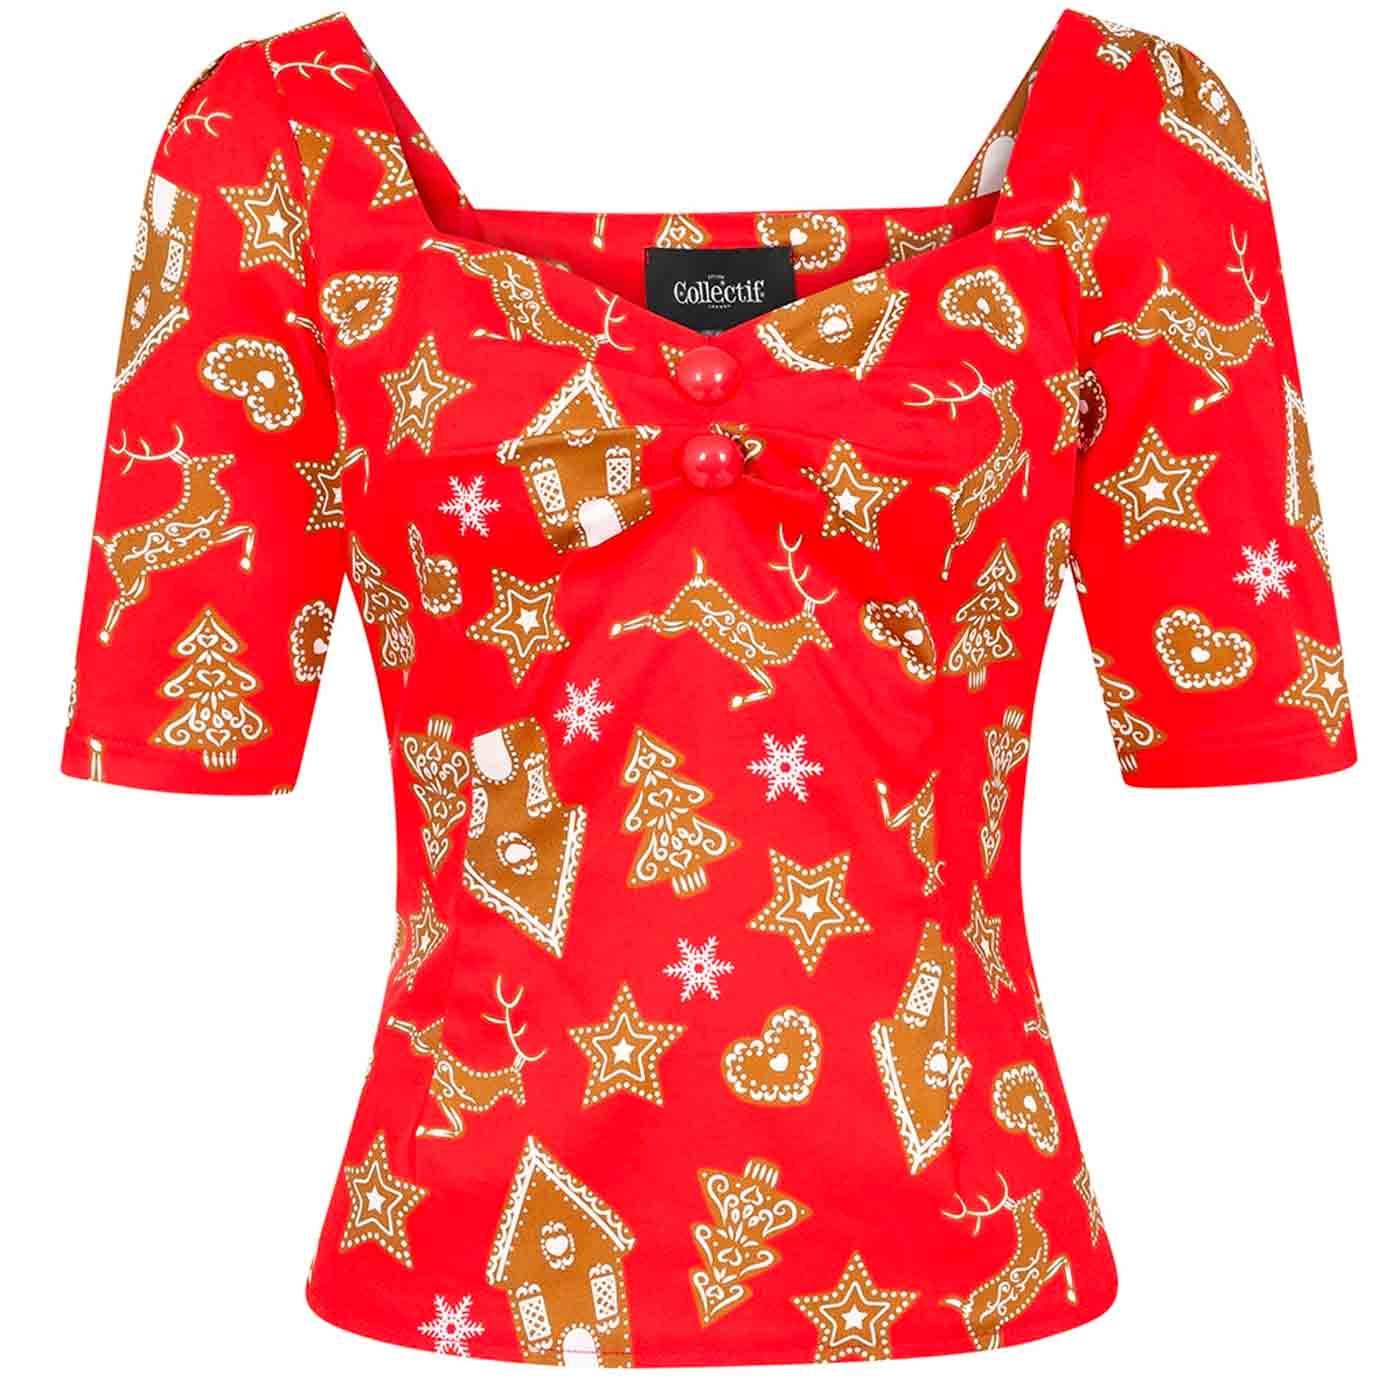 Dolores COLLECTIF Retro 50s Ginger Cookies Top RED